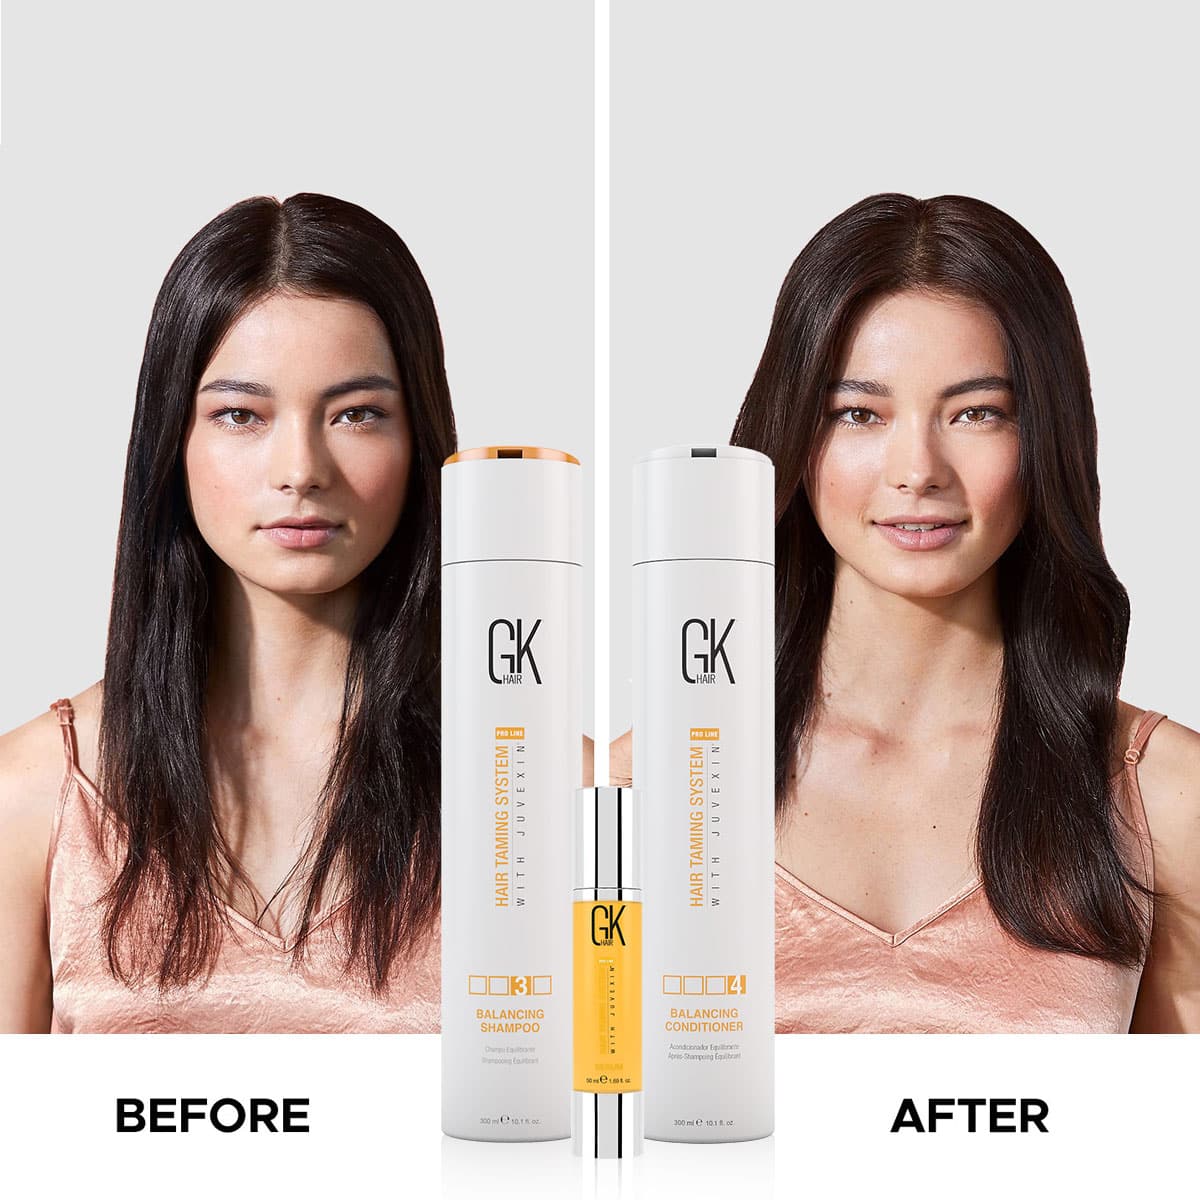 GK Hair Balancing care with Juvexin